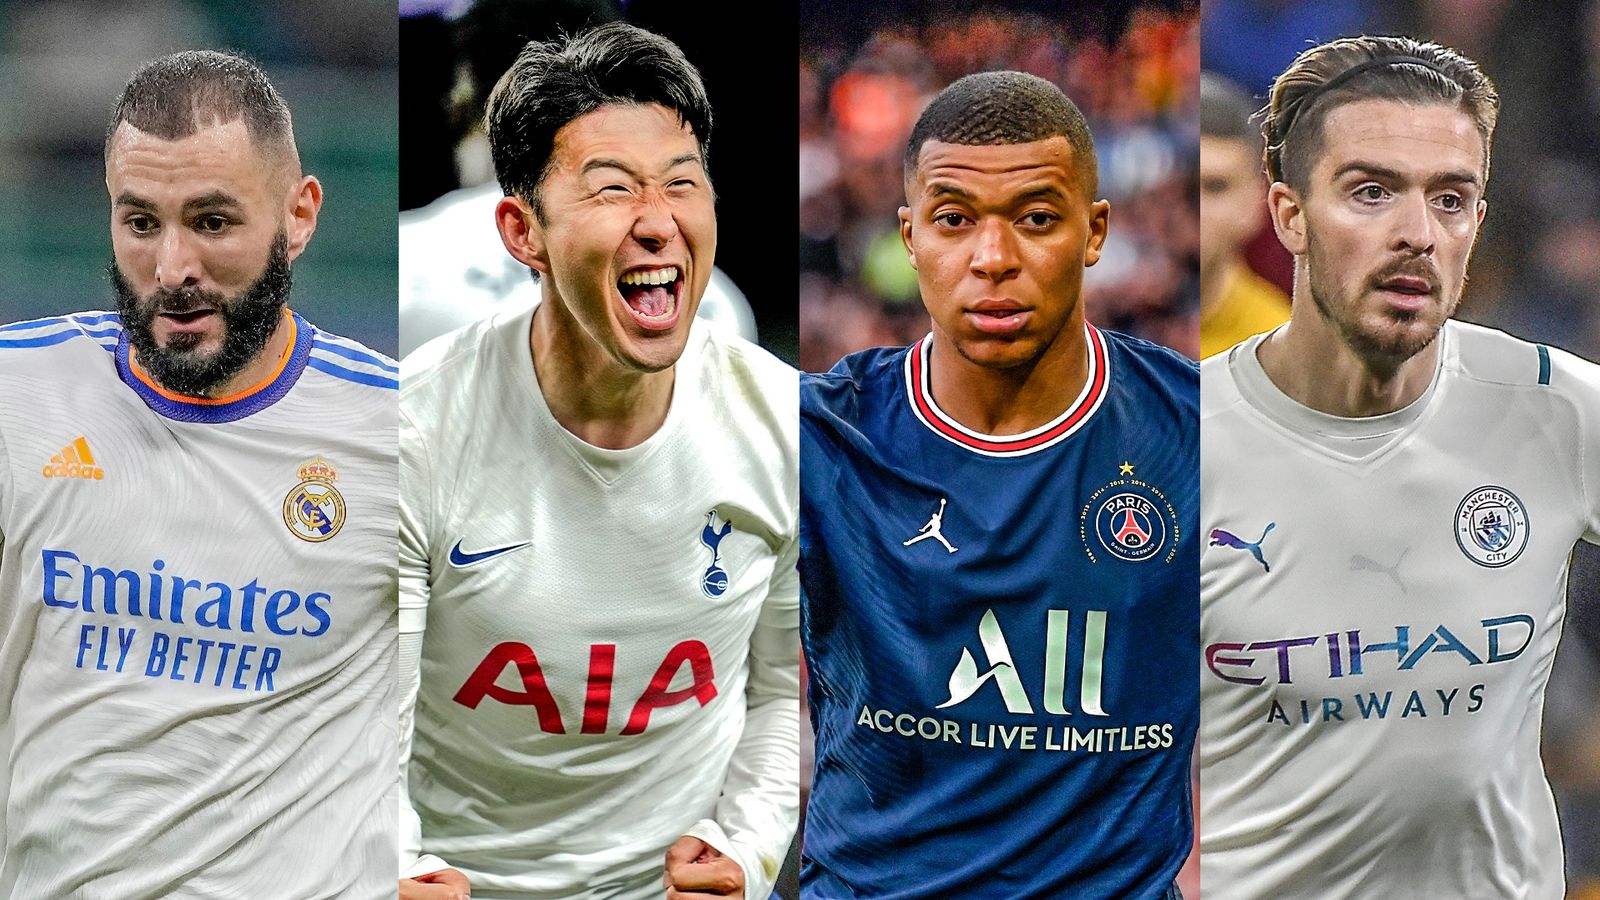 Heung-Min Son wins Premier League Power Rankings 2020/21; Mohamed Salah and Trent Alexander-Arnold among league leaders